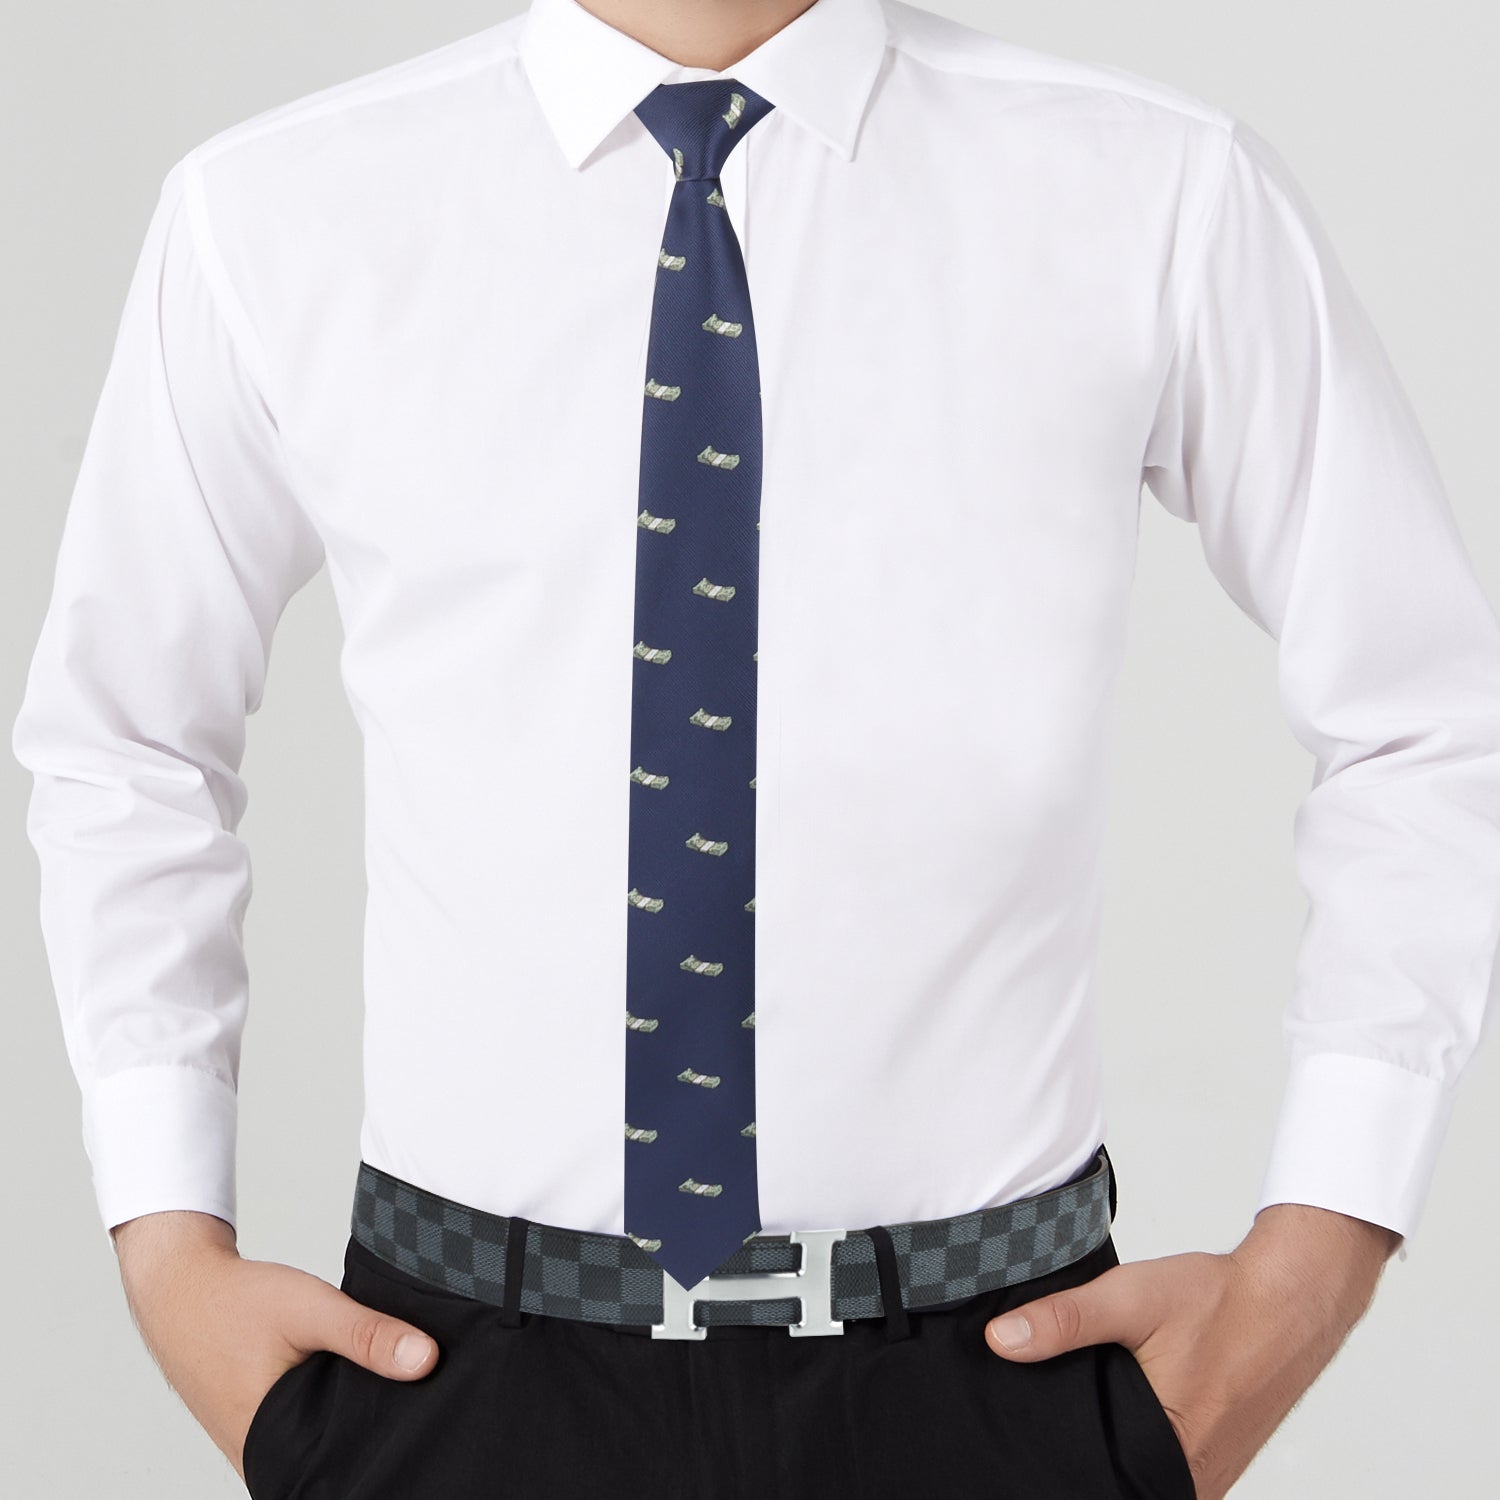 An affluent man wearing a Cash Skinny Tie and white shirt.